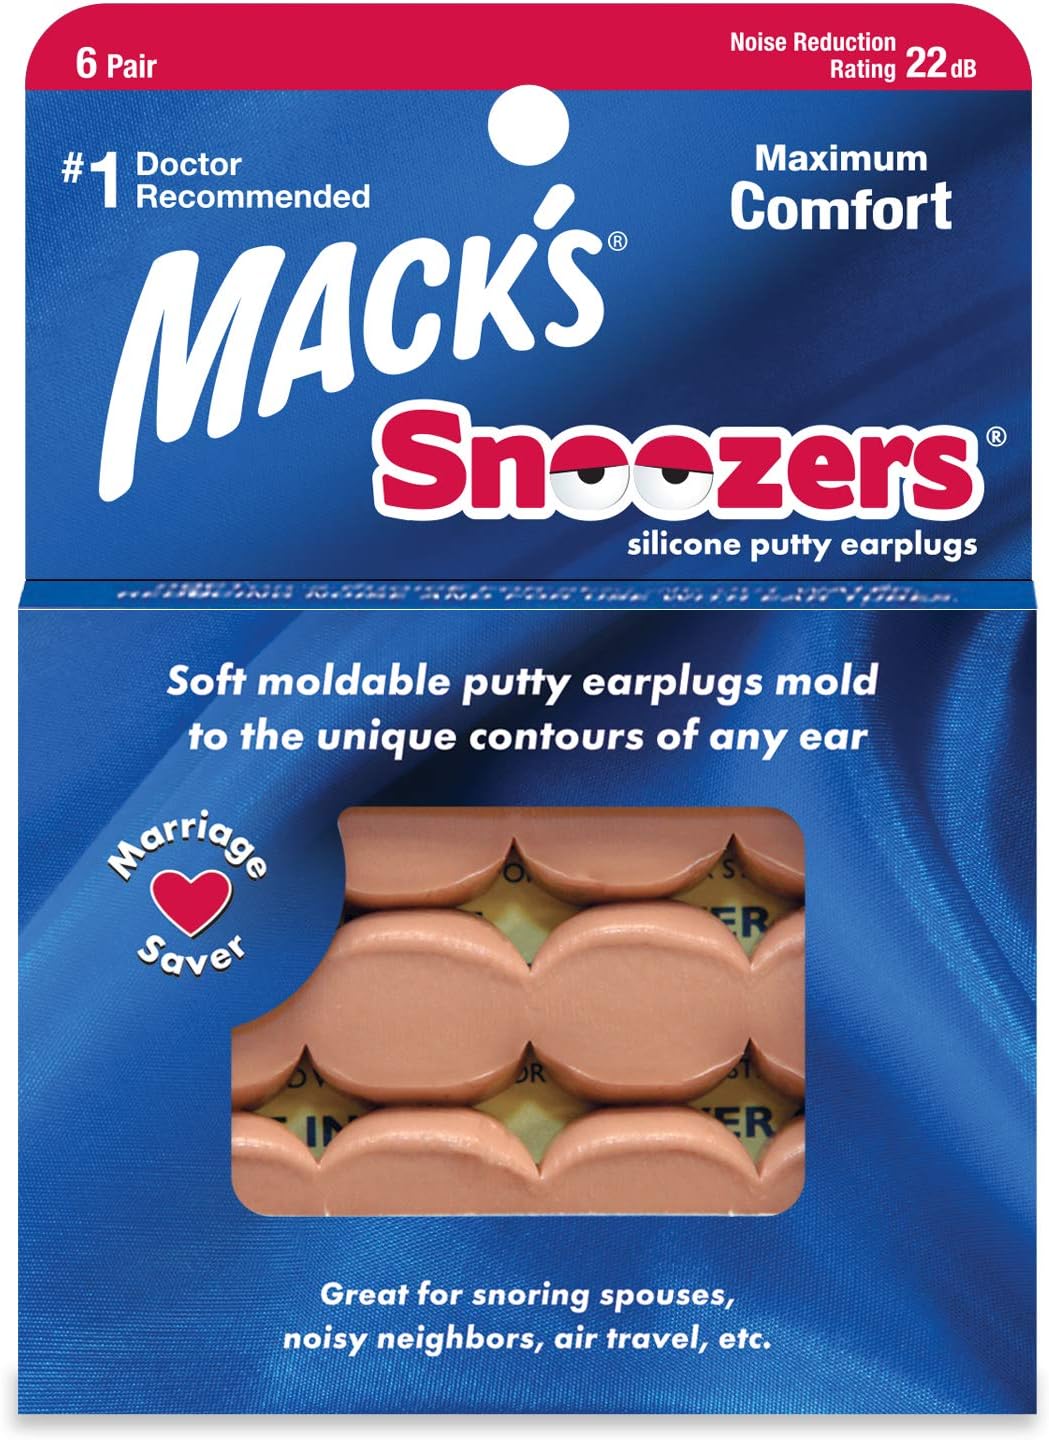 Mack's Snoozers Silicone Putty Earplugs - 6 Pair ? Comfortable, Moldable Silicone Ear Plugs for Sleeping, Snoring, Loud Noise & Traveling | Made in USA